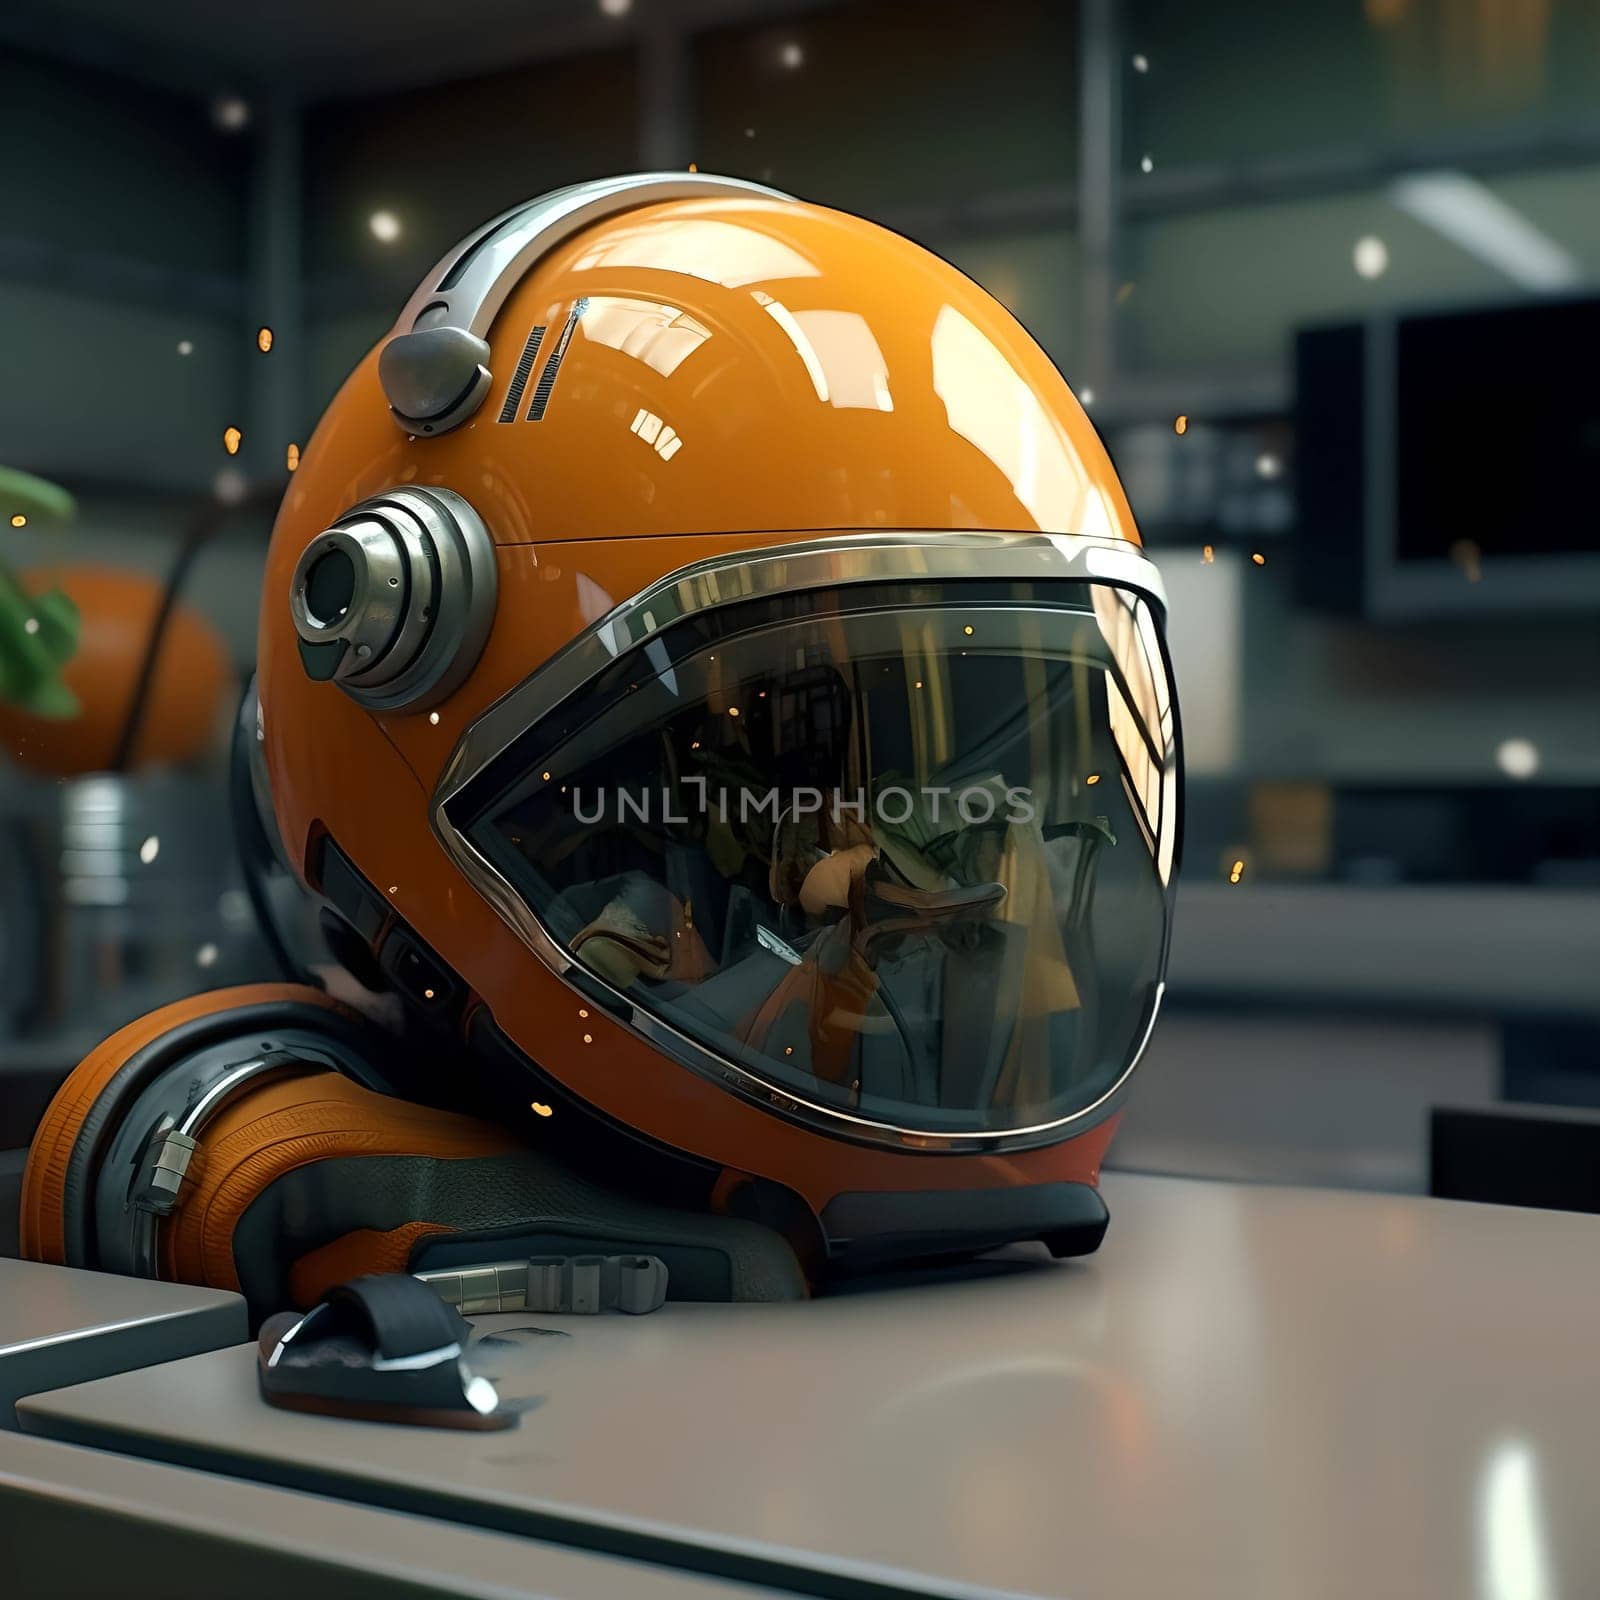 The helmet of the future lies on the table in the interior